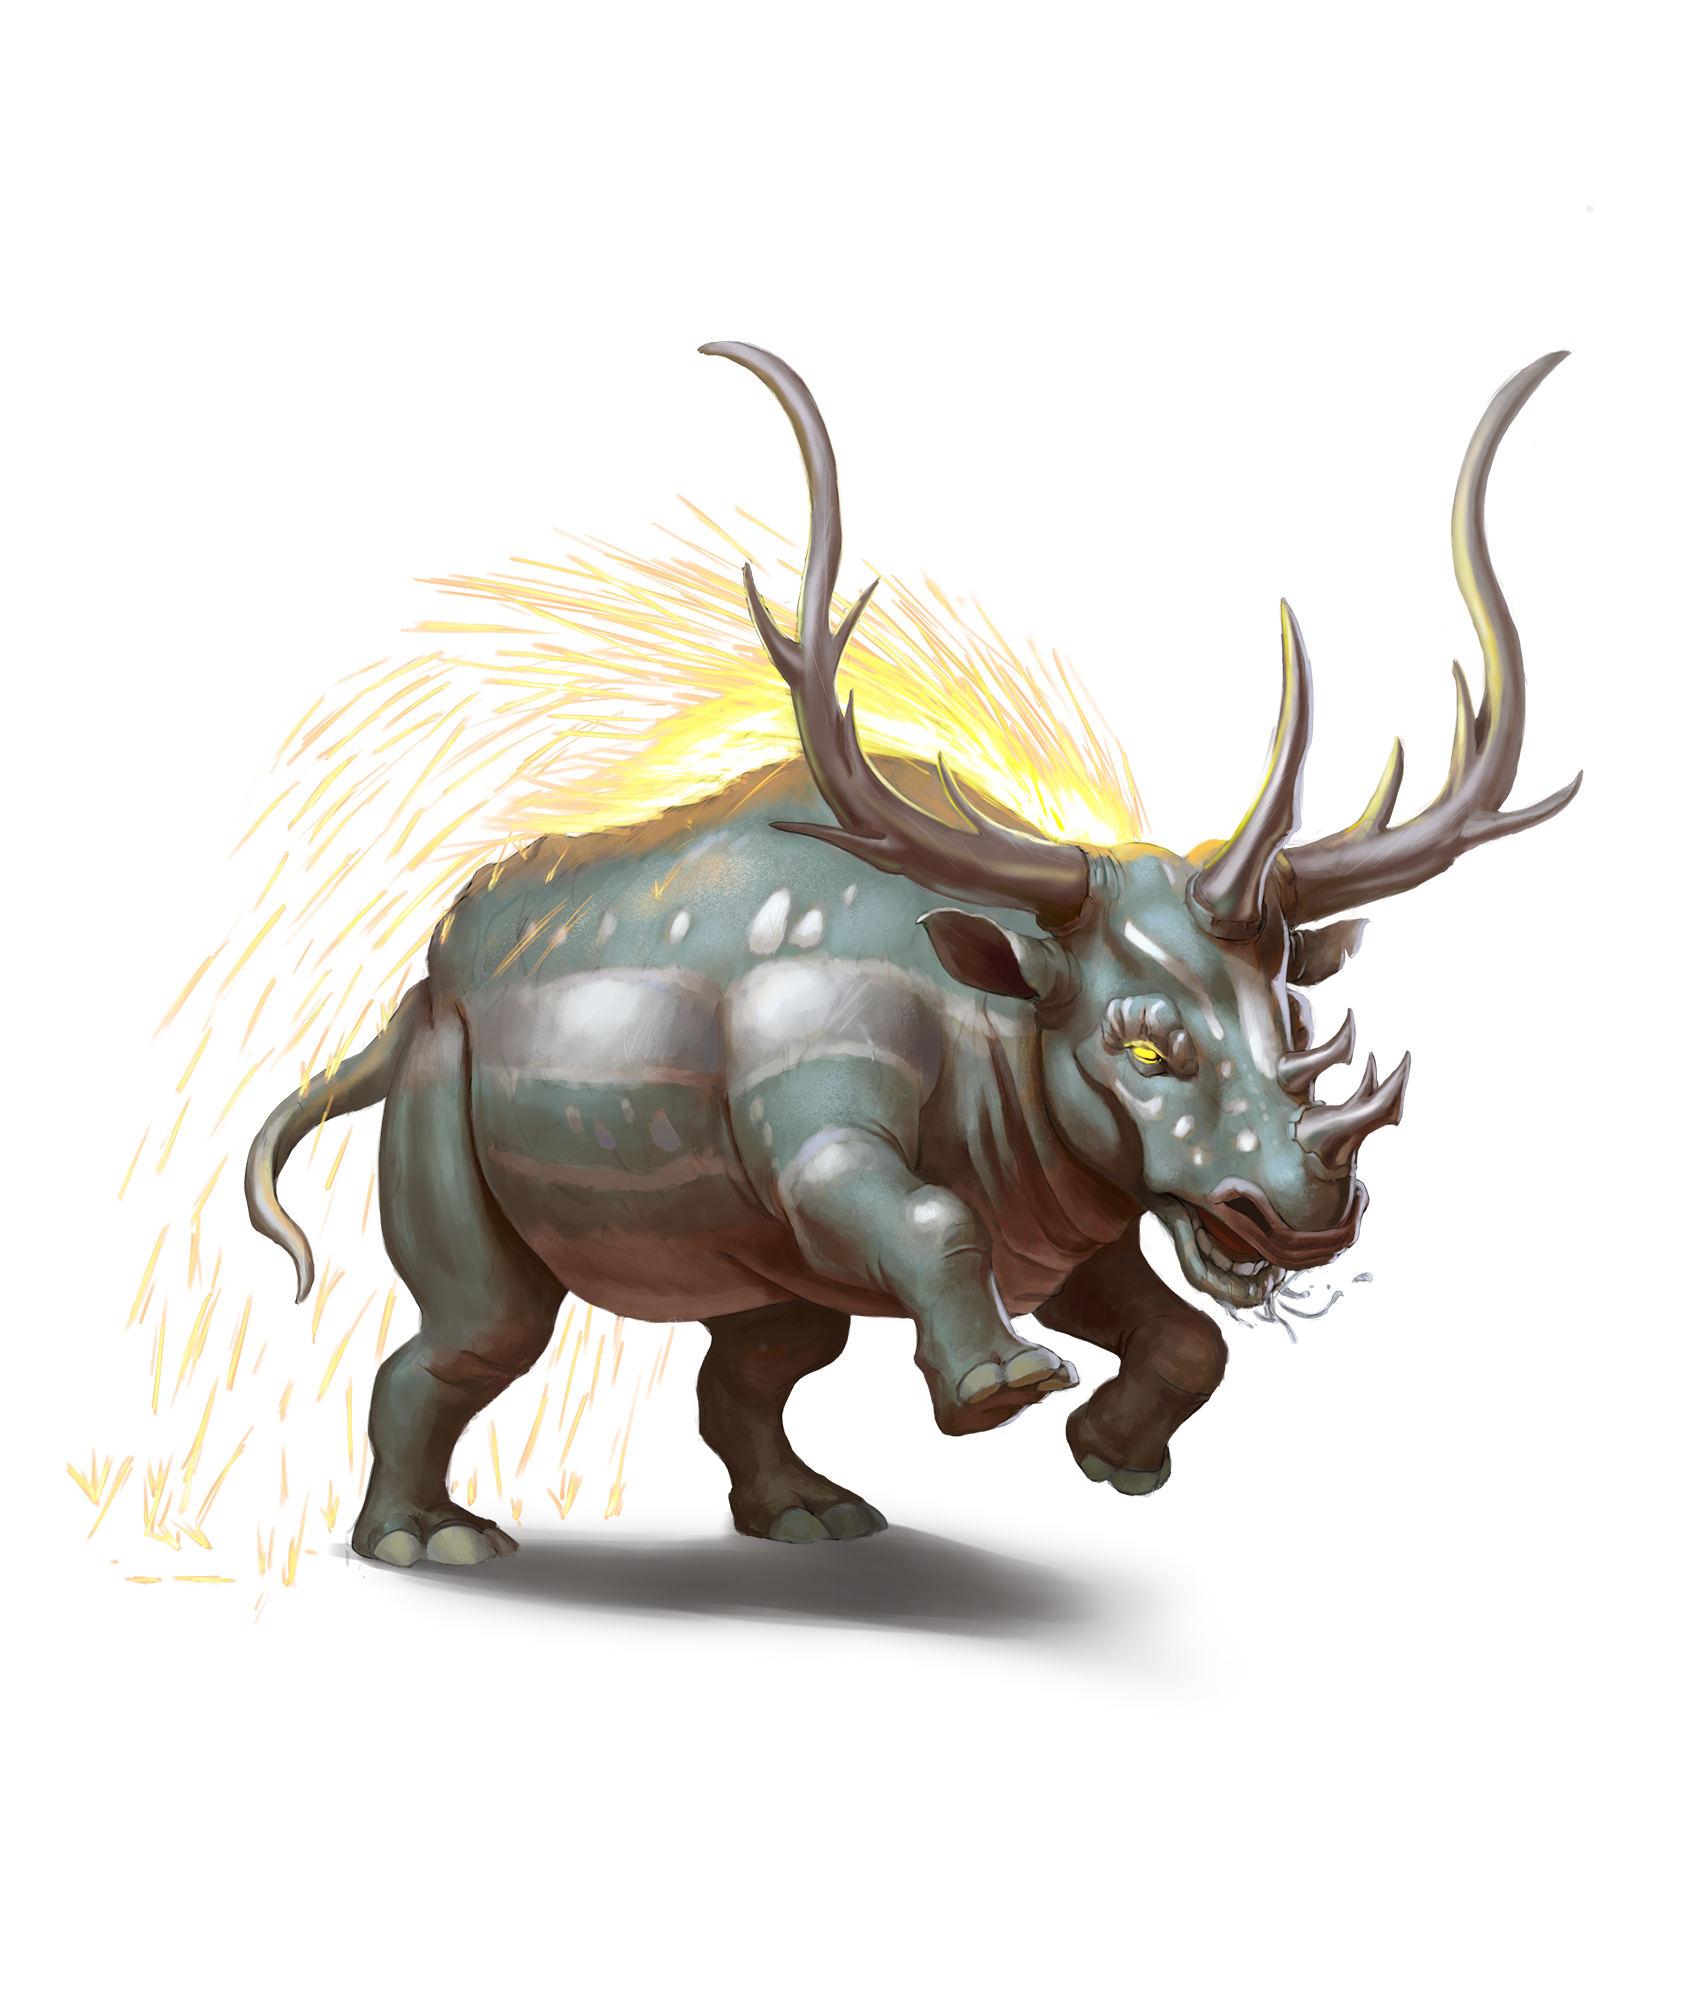 Sparks fly from the back of a charging, antlered, creature with the body of a rhinoceros